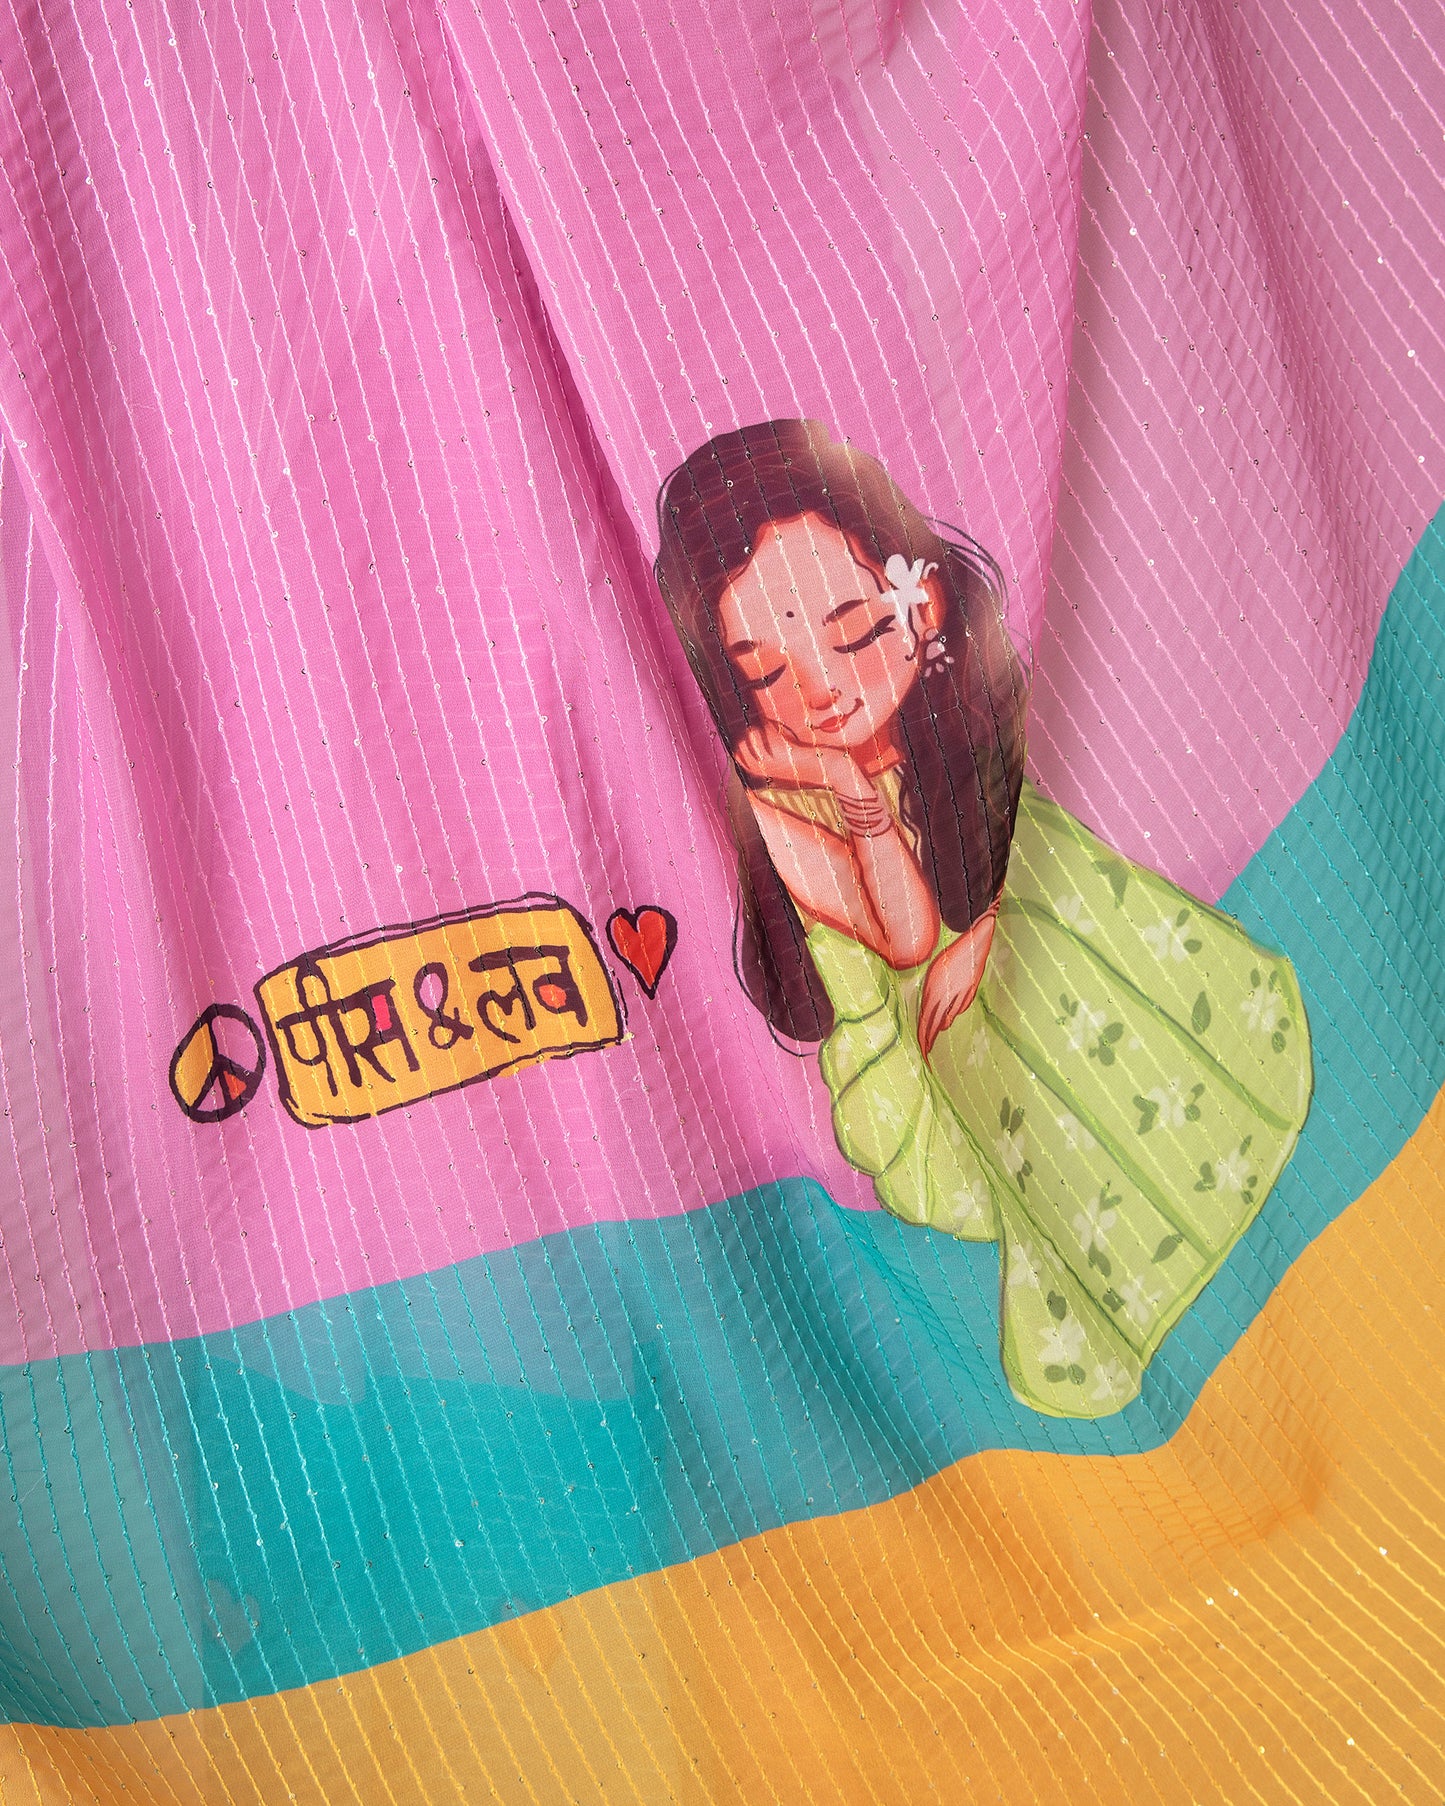 Unleash Your Inner Fashionista With Quirky Pre-Draped Saree